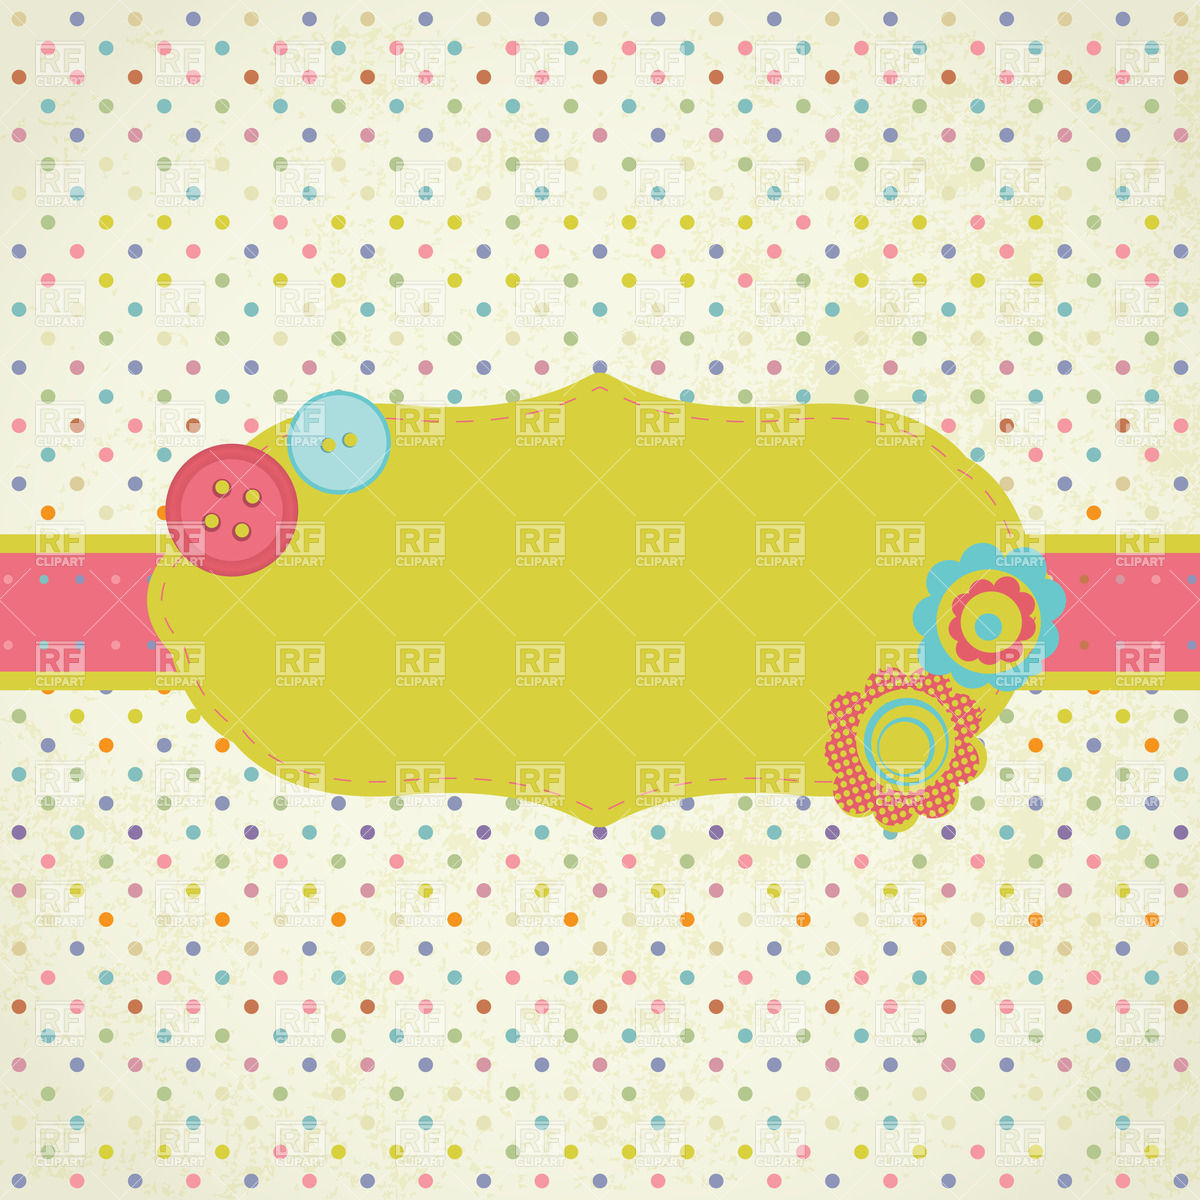 Frame On Polka Dot Background Download Royalty Free Vector Clipart